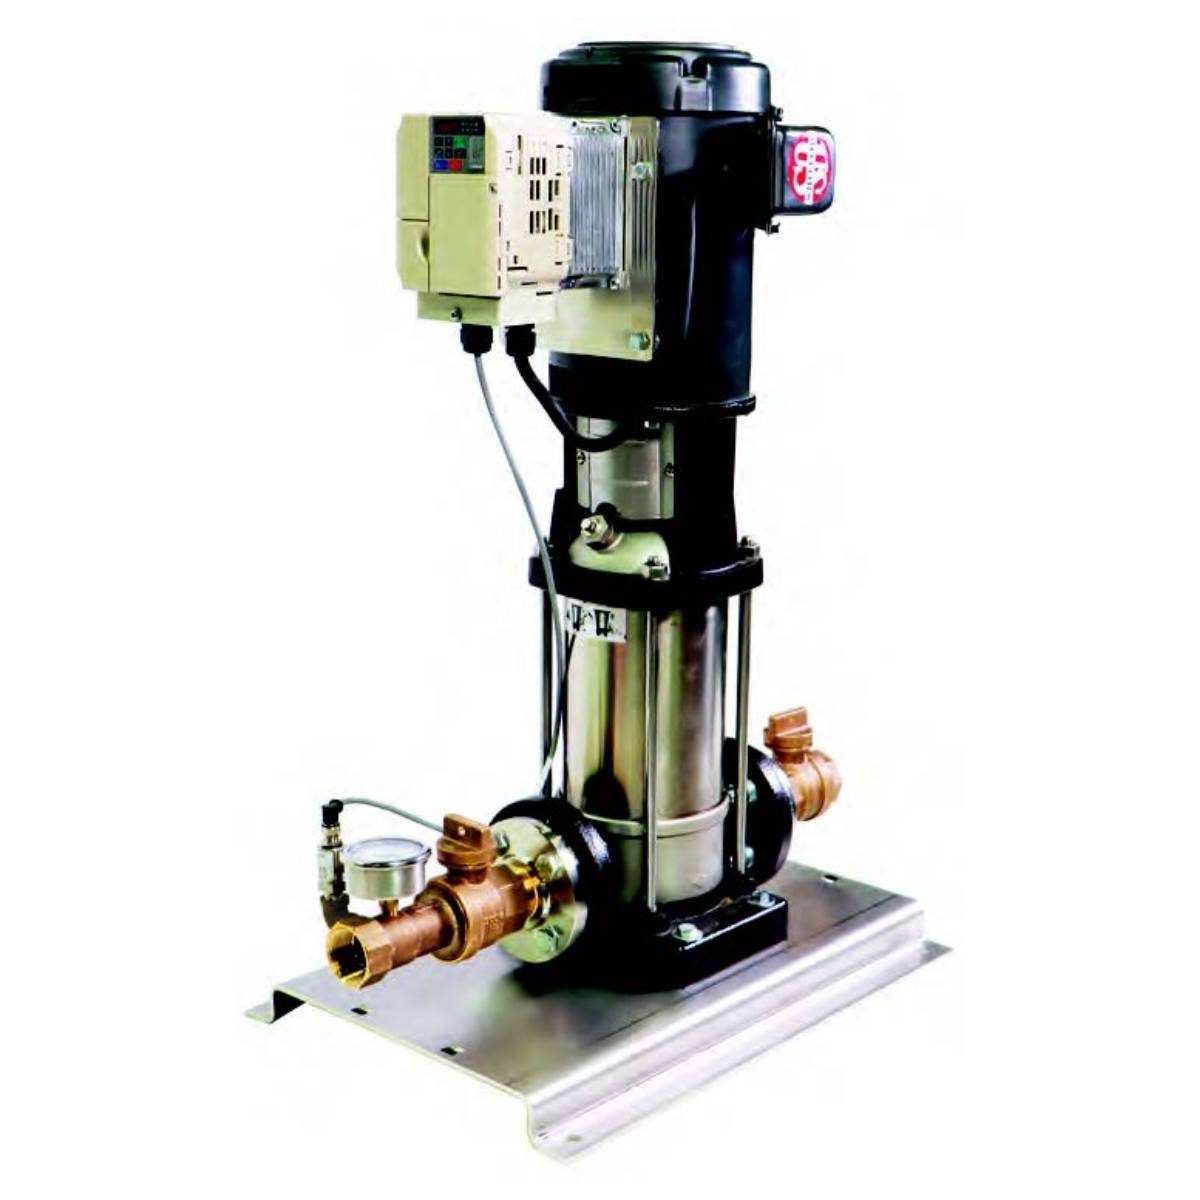 Booster Pump, Simplex, Vertical Multistage Variable Speed